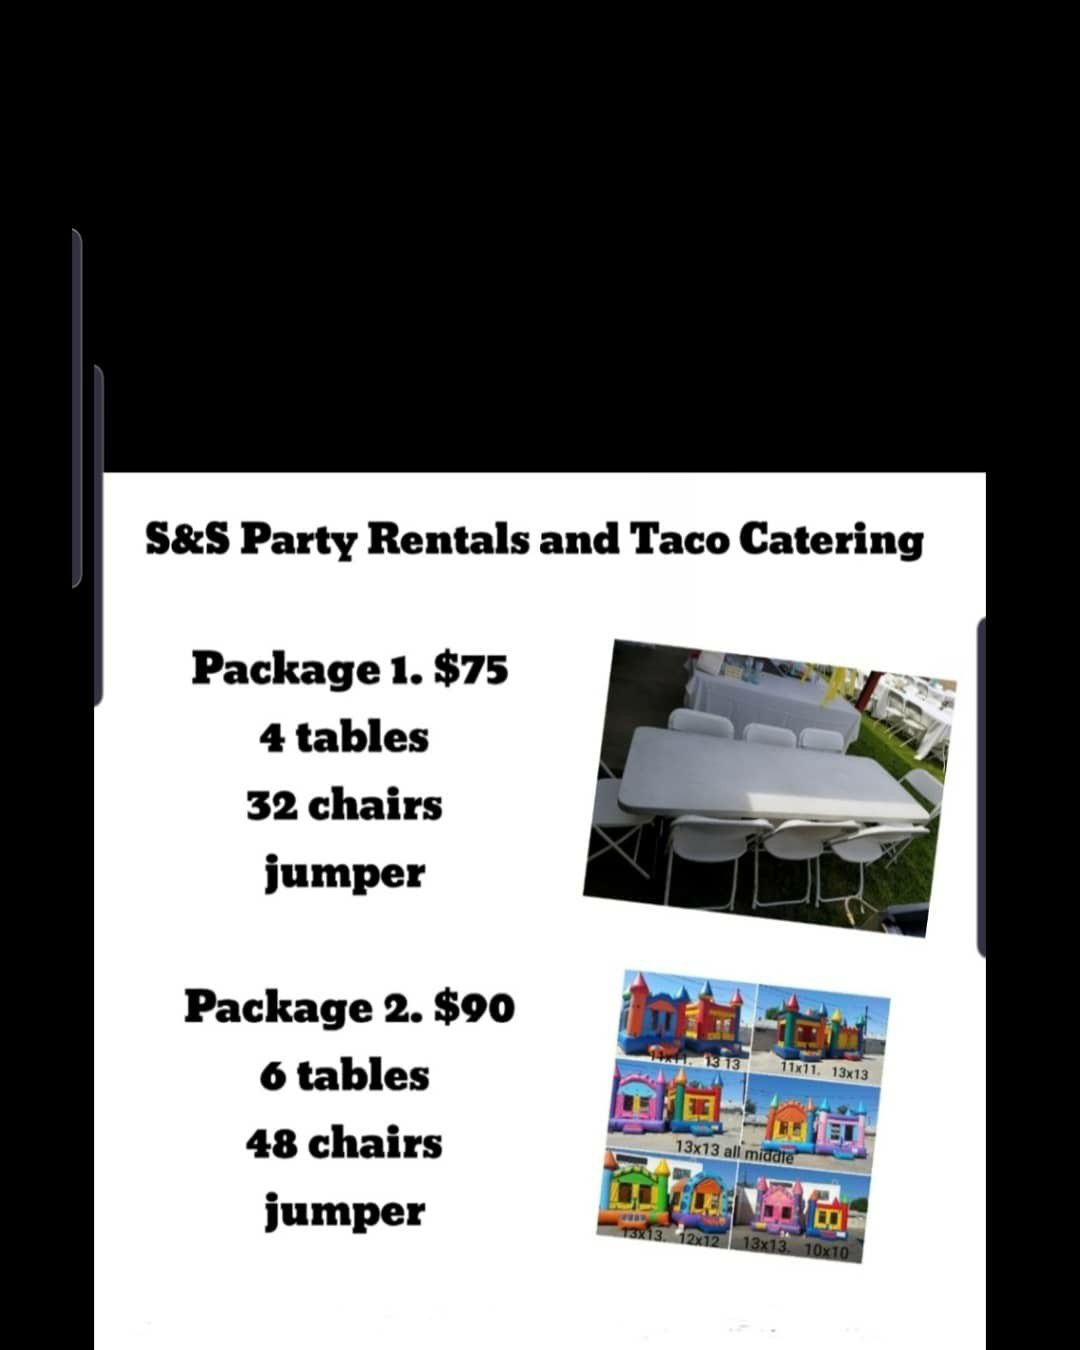 PACKAGES FOR SALE